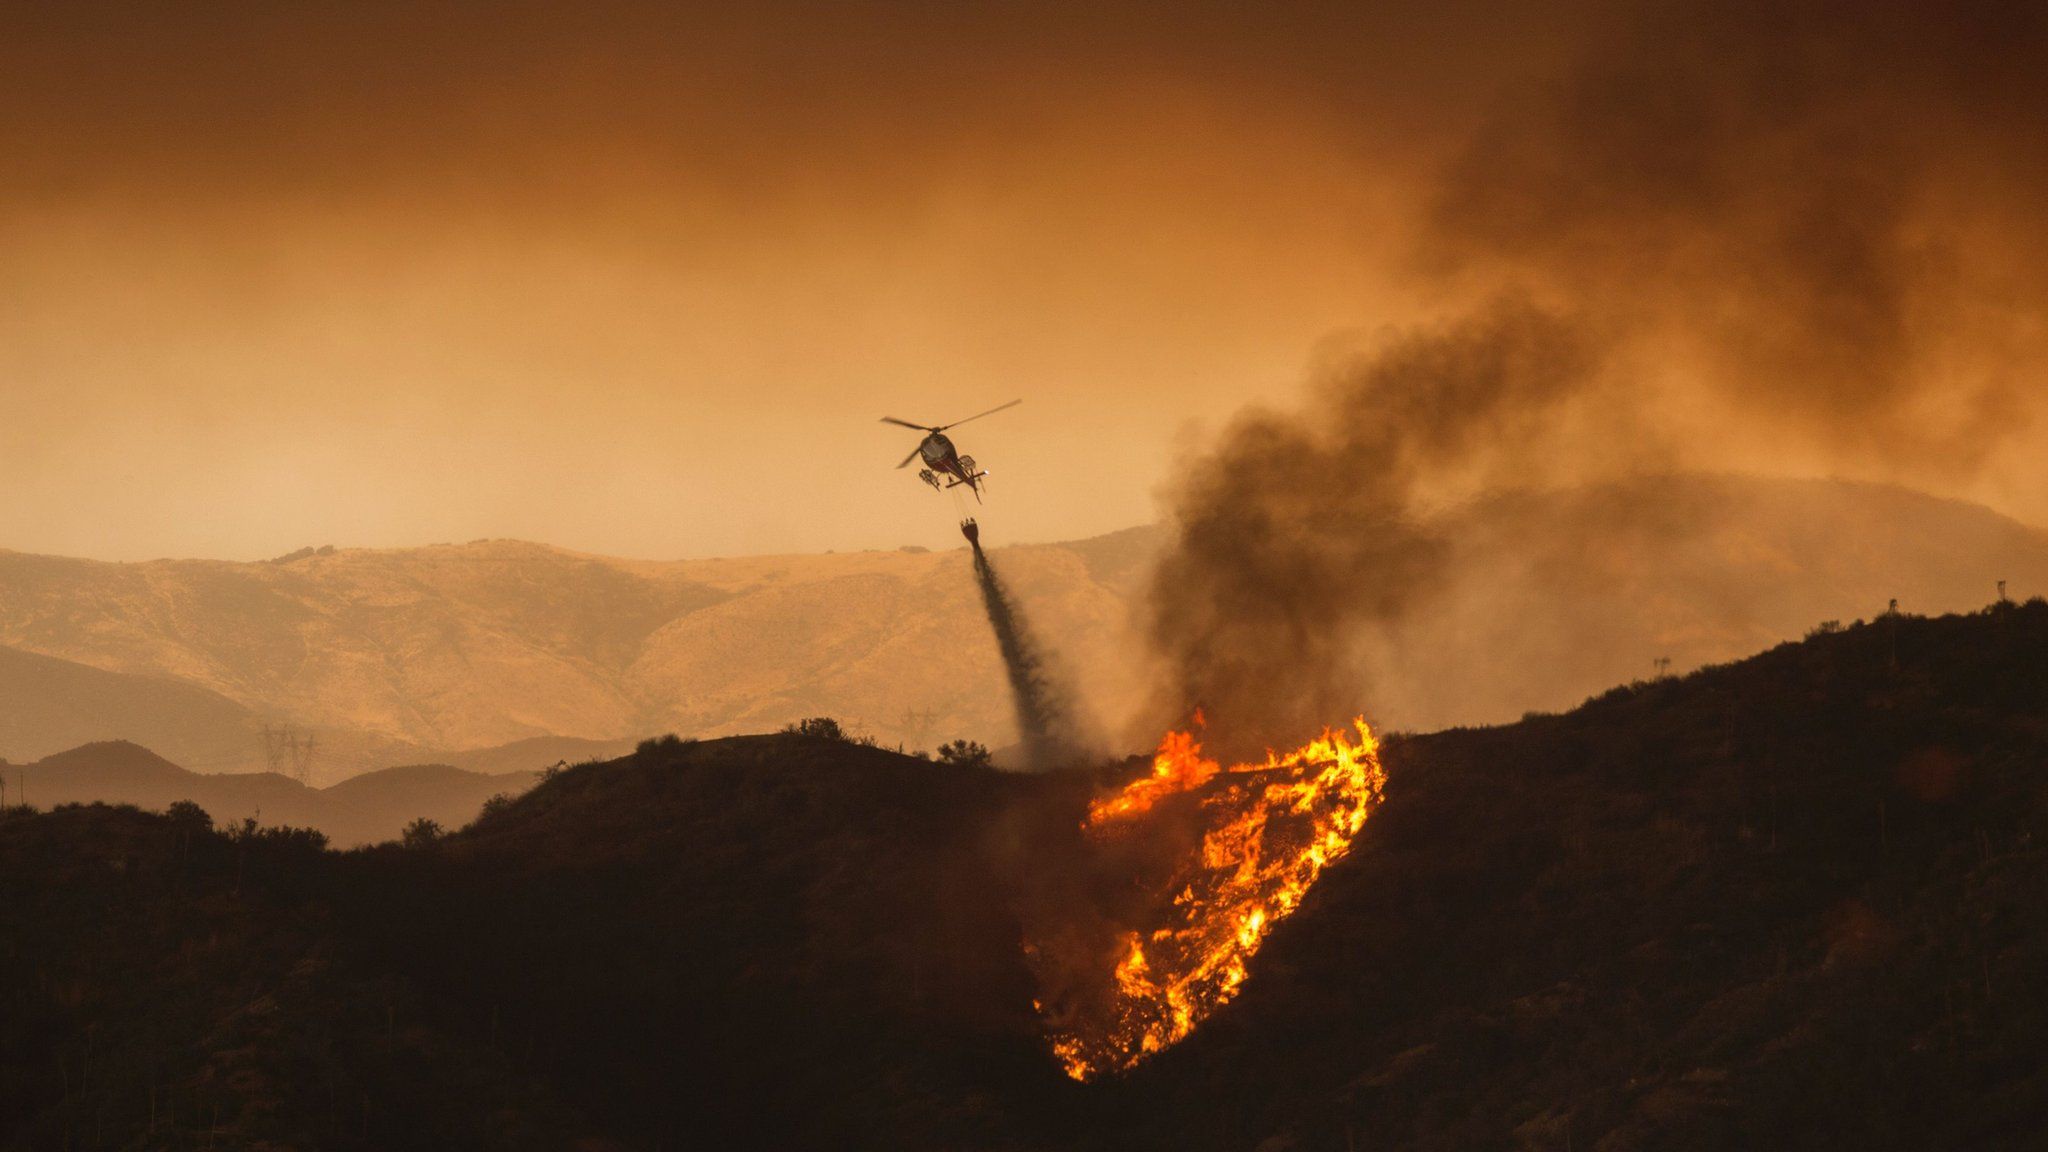 A firefighting helicopter drops water at the Sand Fire on July 23 2016 near Santa Clarita, California